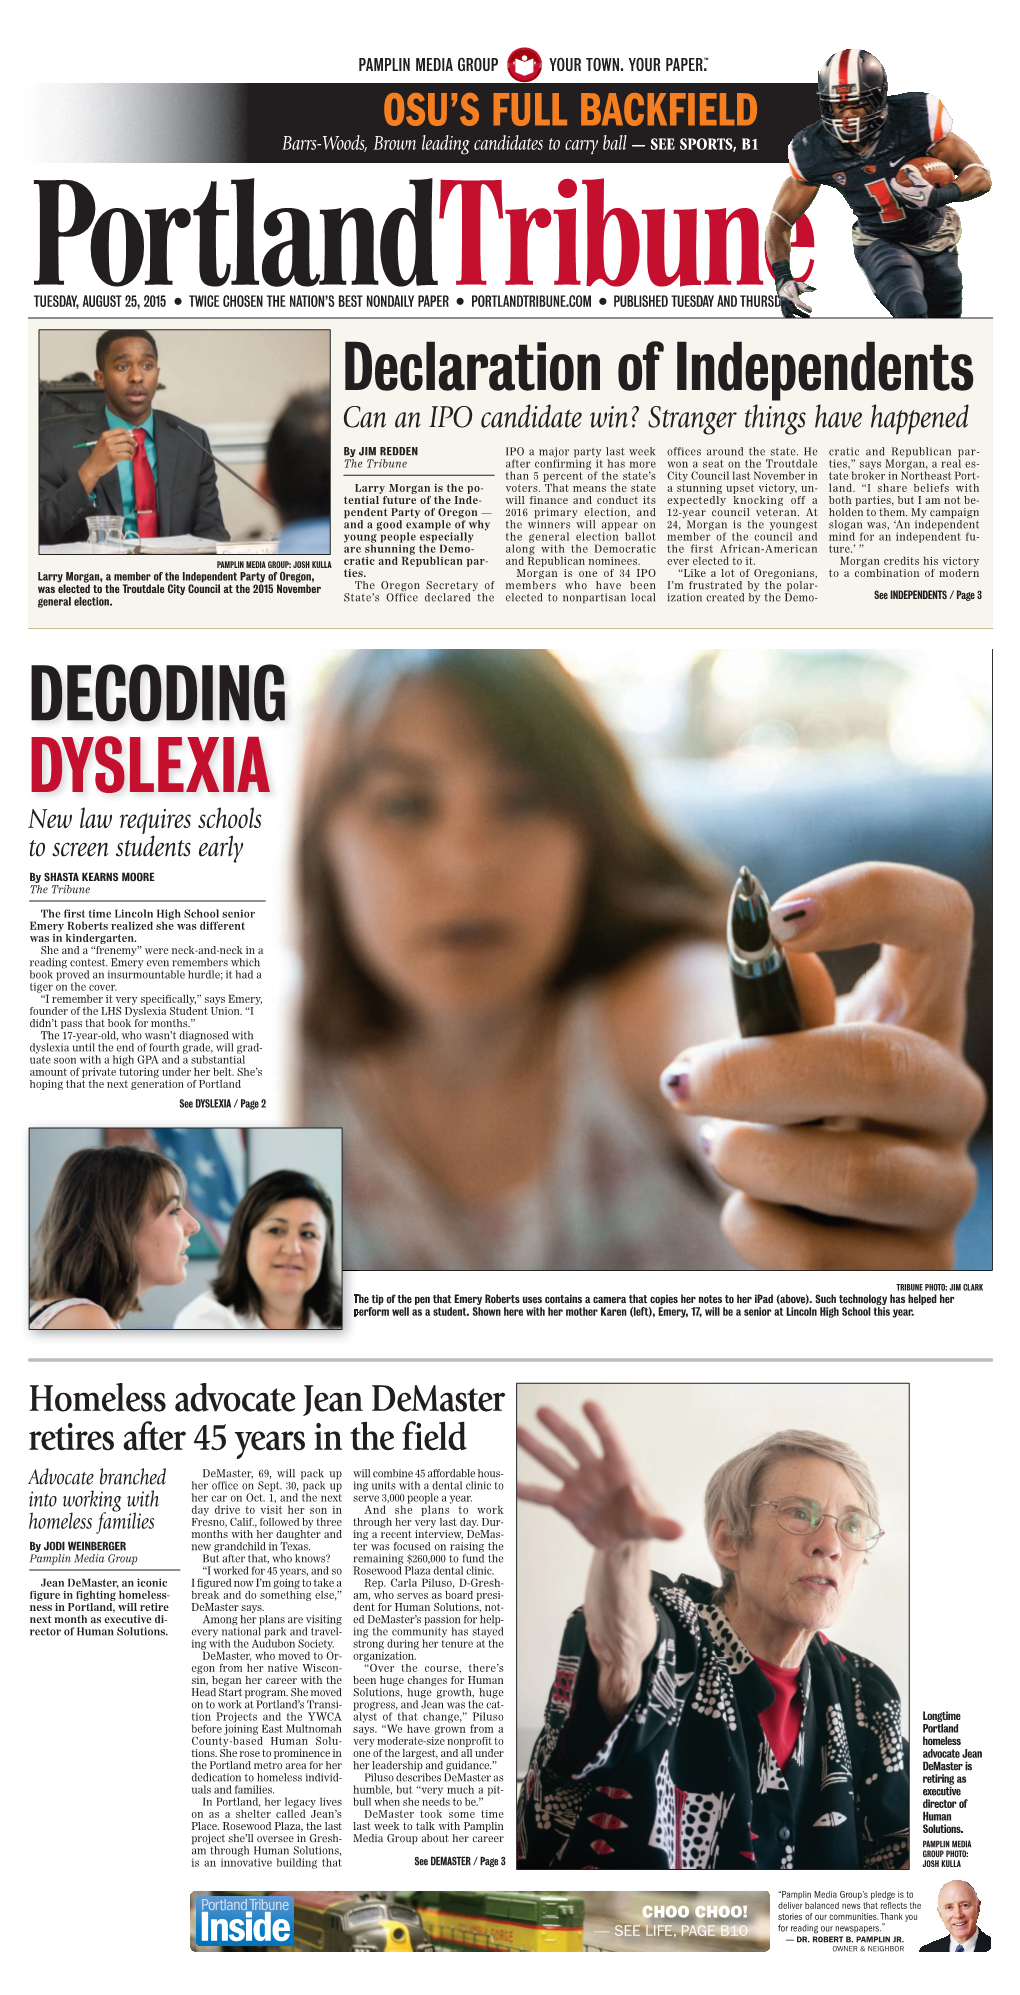 DECODING DYSLEXIA New Law Requires Schools to Screen Students Early by SHASTA KEARNS MOORE the Tribune